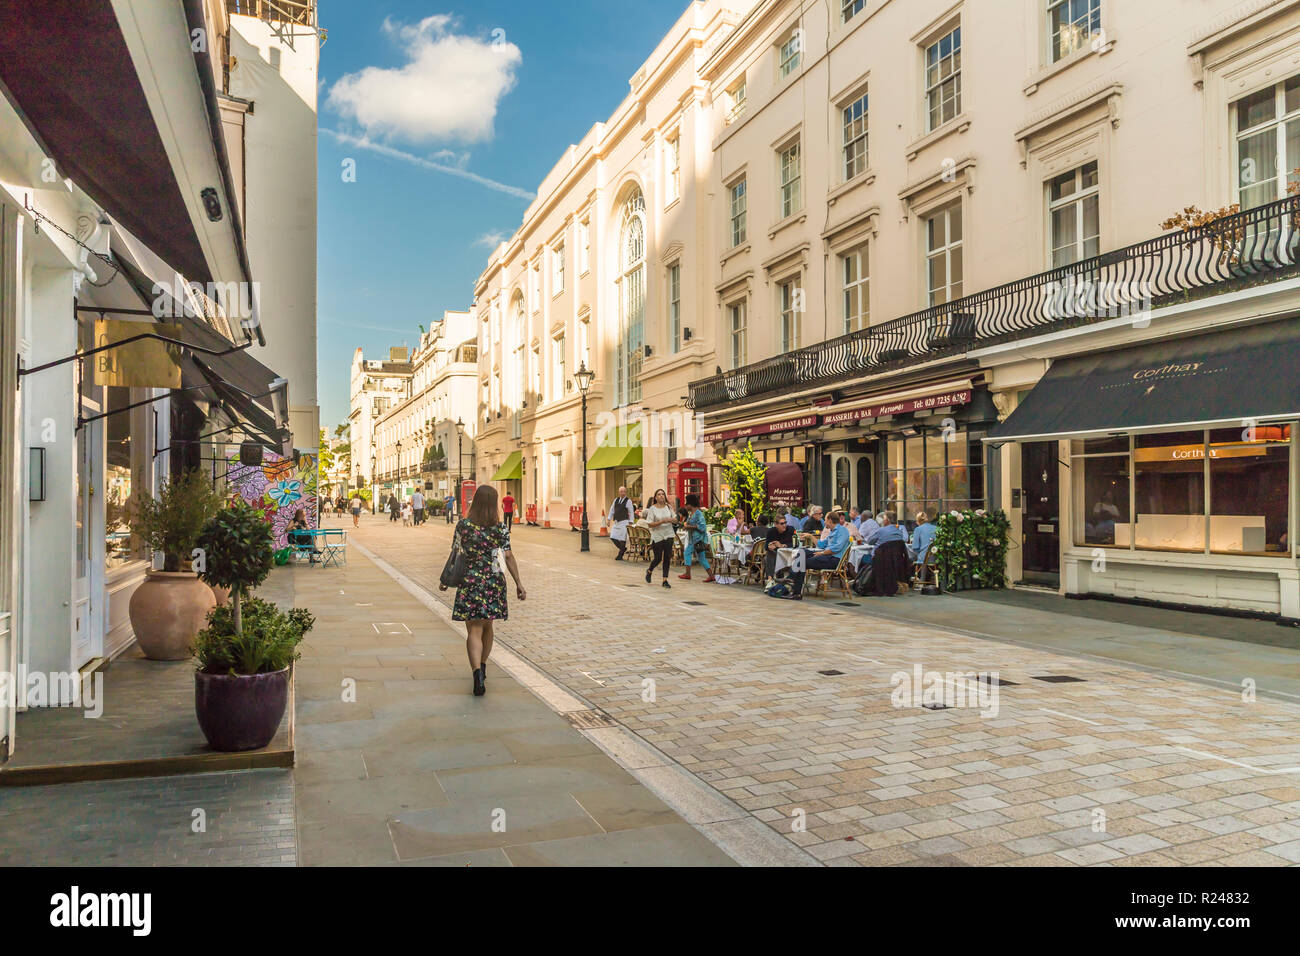 A typically grand shopping street in Belgravia, London, England, United Kingdom, Europe Stock Photo